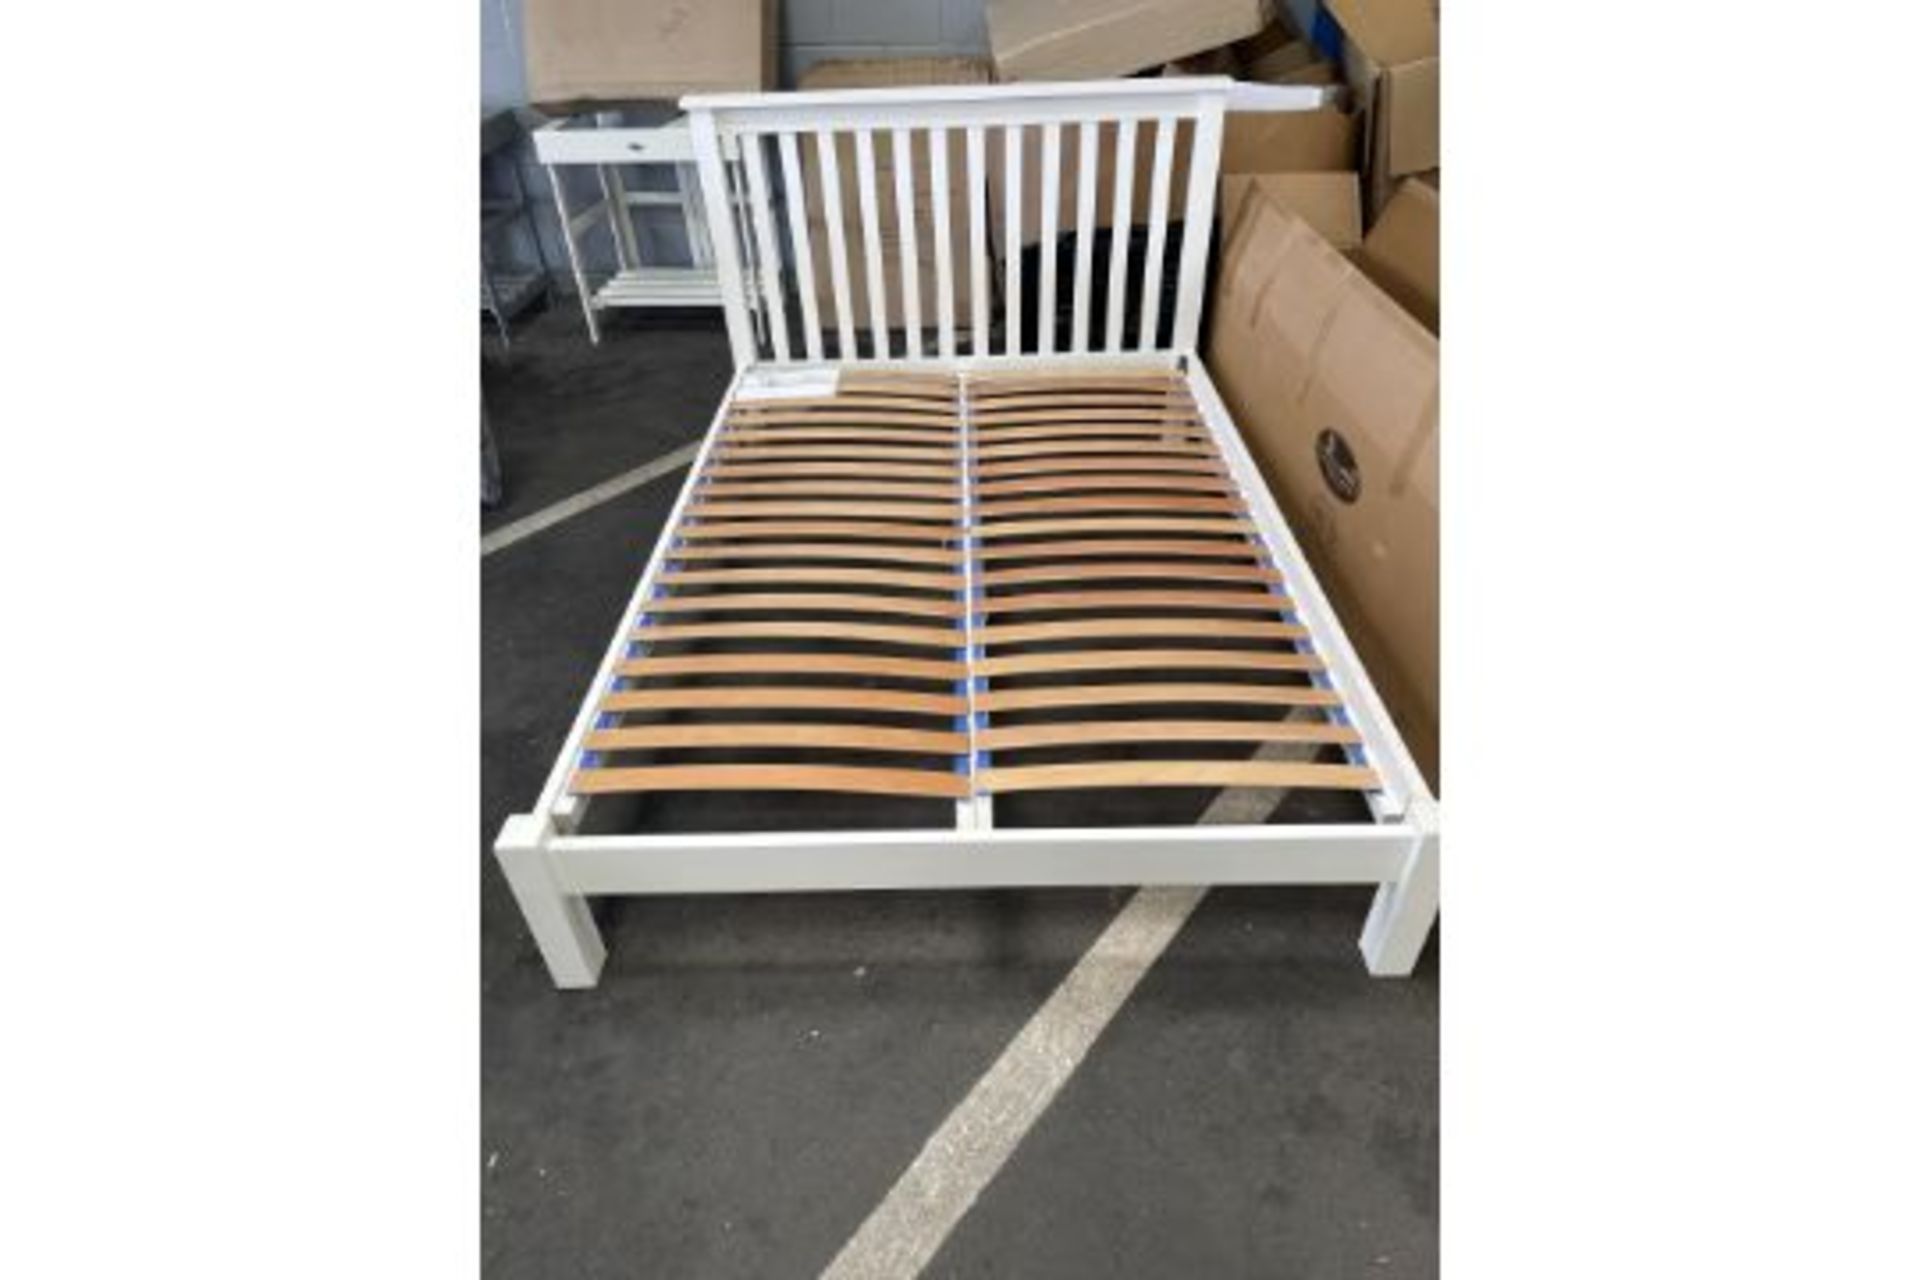 New Dunelm 5ft Kingsize White Solid Wood Bed Frame (3 boxes) - RRP £499.99.